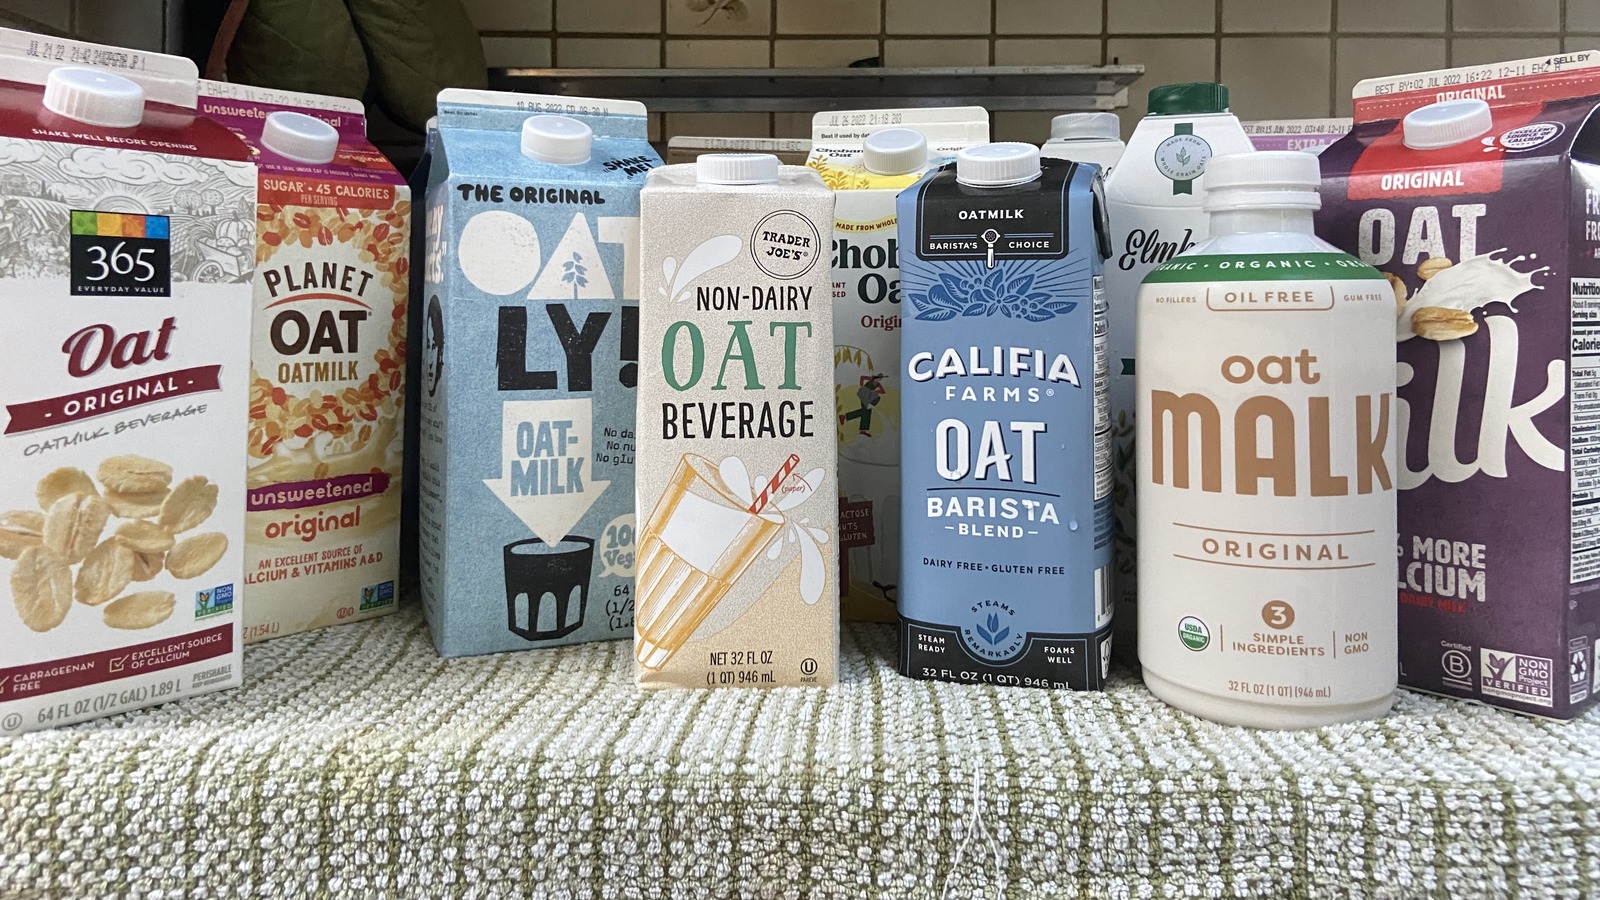 What Oat Milk Does Starbucks Use and Why It's so Special?